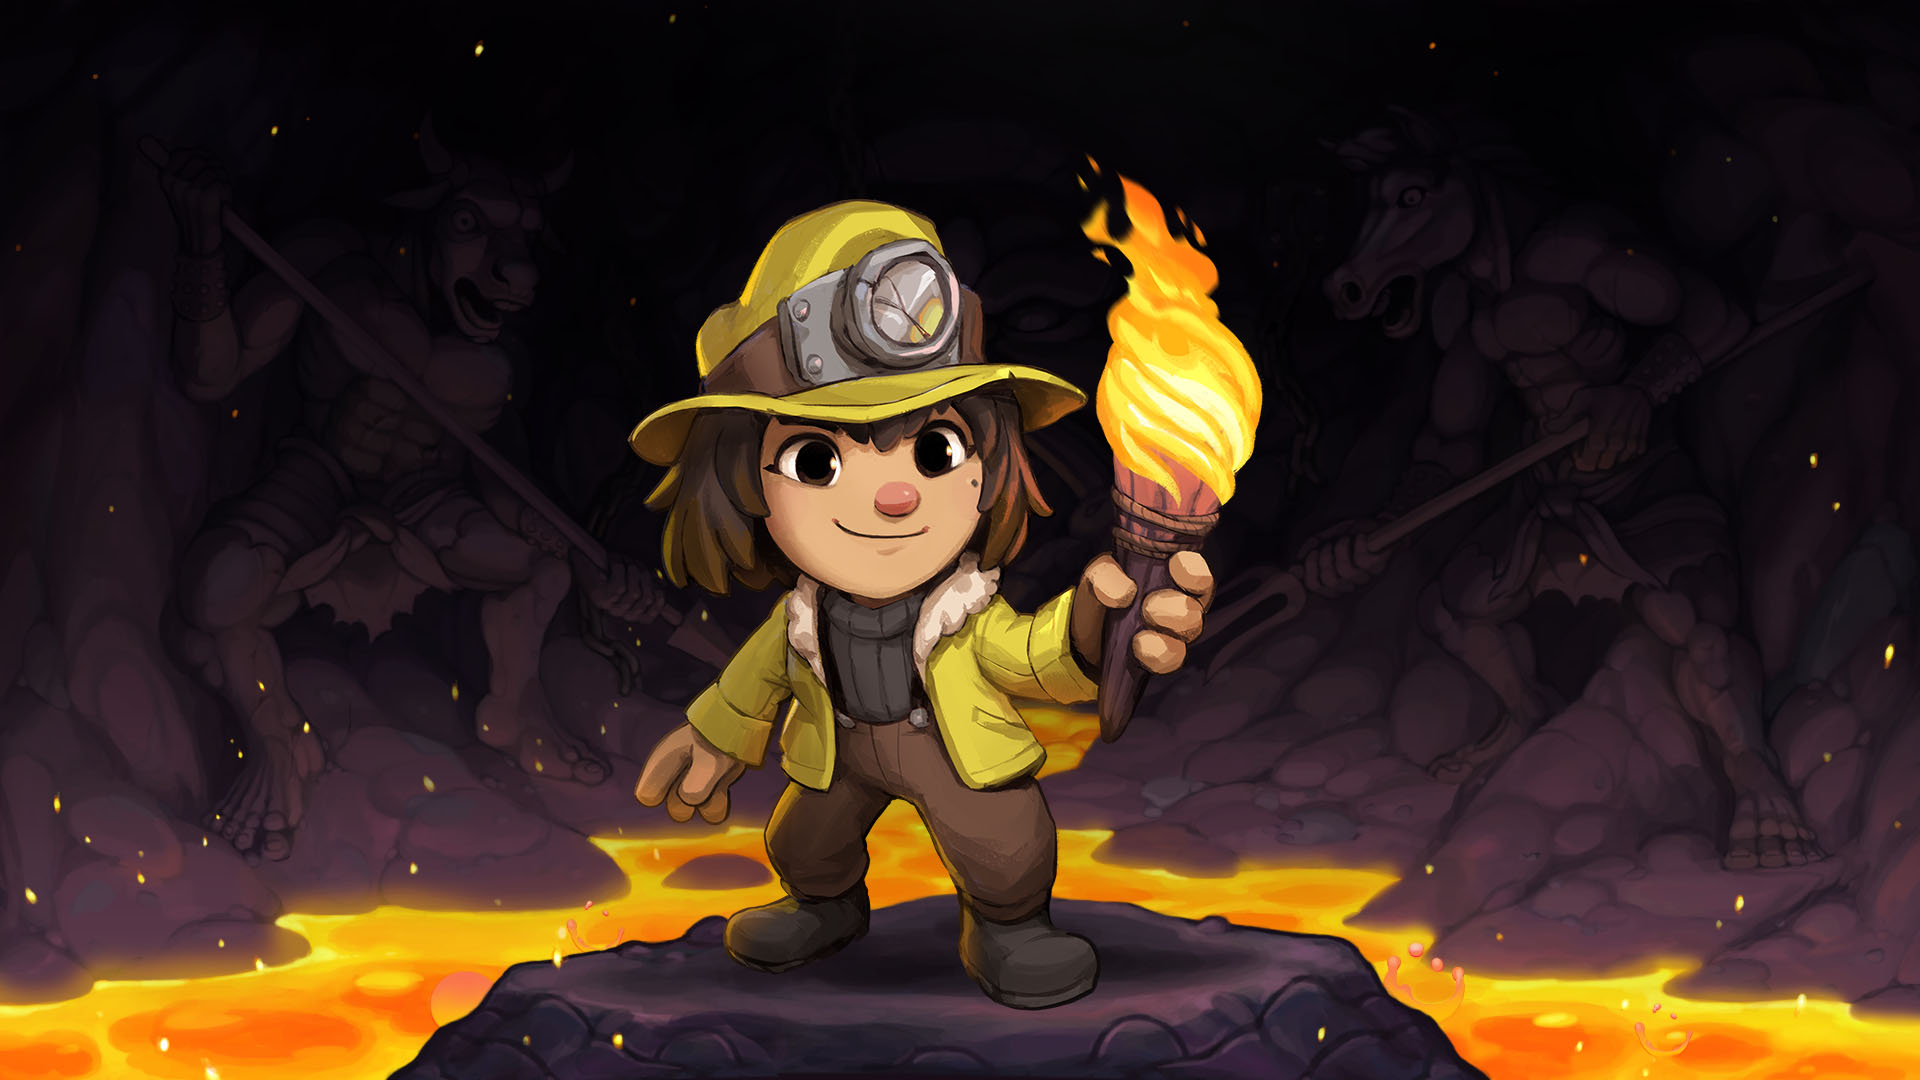 Ana Spelunky, surrounded by lava, holds a torch